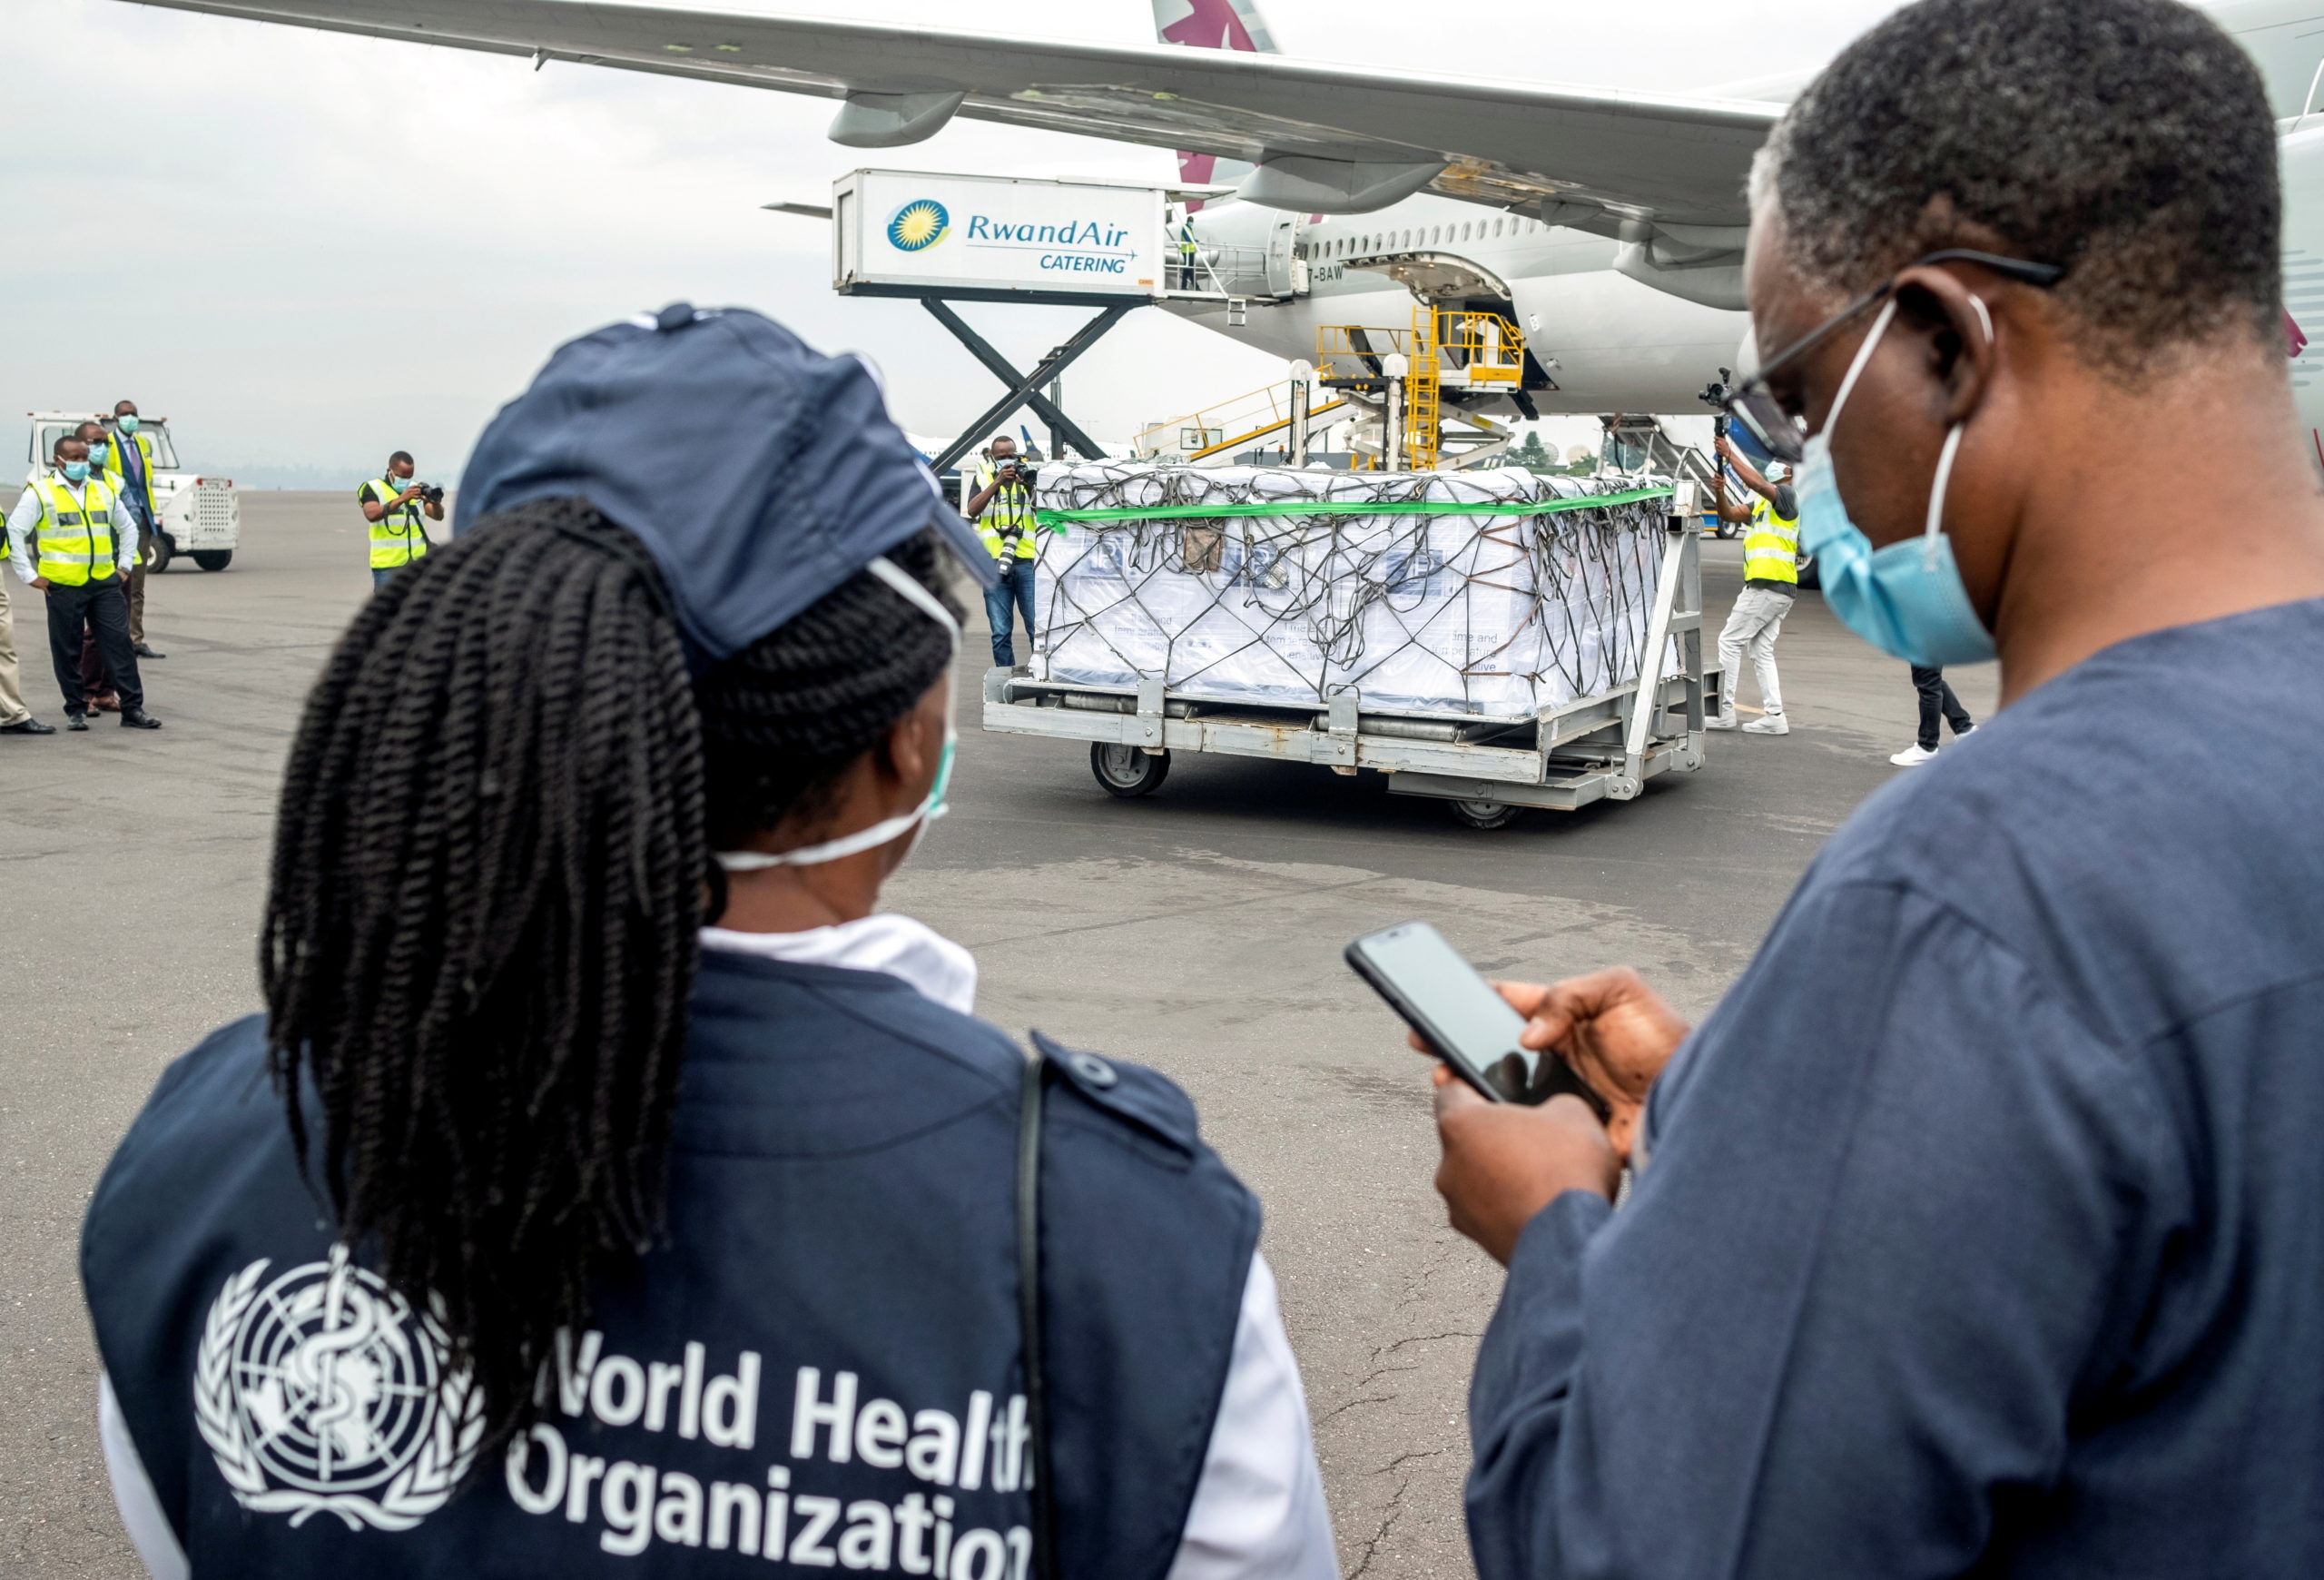 FILE PHOTO: World Health Organization (WHO) officials attend the arrival of the first batch of vaccines against the coronavirus disease (COVID-19) at the Kigali international airport in Kigali, Rwanda March 3, 2021. REUTERS/Jean Bizimana/File Photo